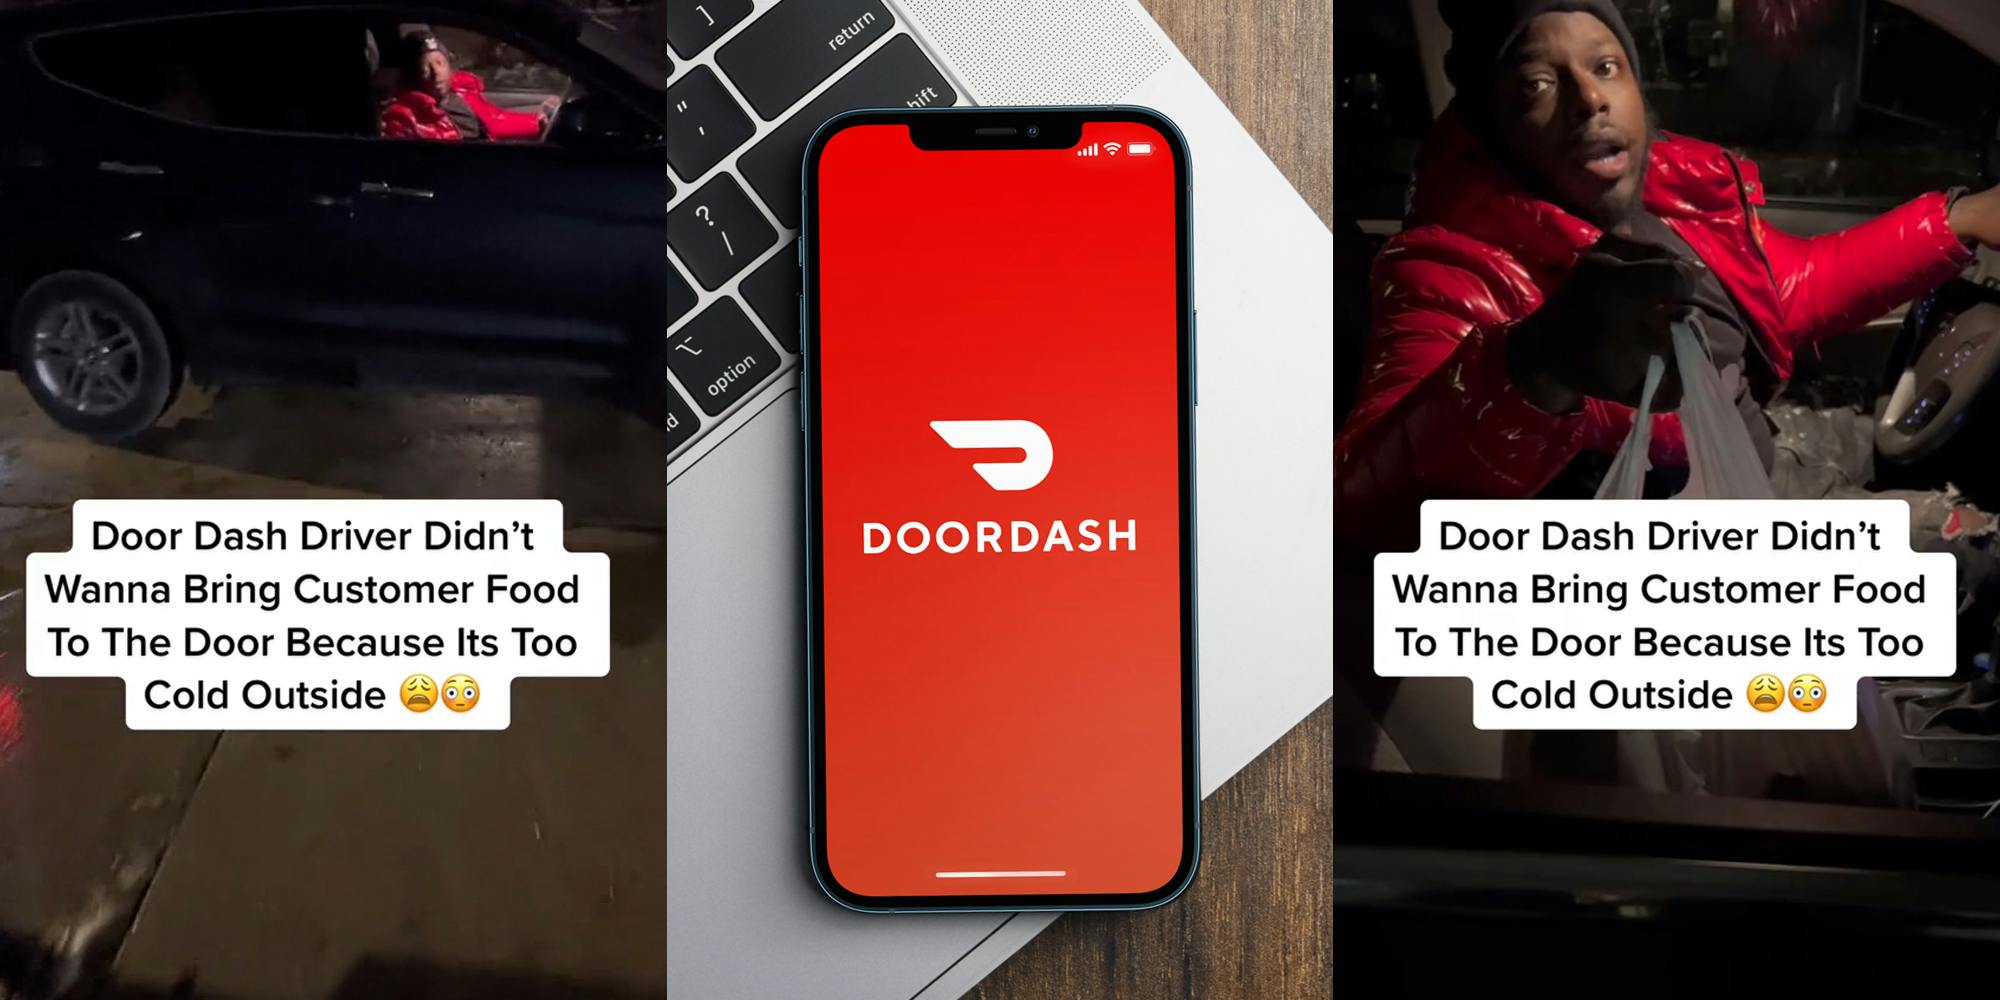 DoorDash driver in car with caption "Door Dash Driver Didn't Wanna Bring Customer Food To The Door Because Its Too Cold Outside" (l) DoorDash on phone on laptop keyboard (c) DoorDash driver in car with caption "Door Dash Driver Didn't Wanna Bring Customer Food To The Door Because Its Too Cold Outside" (r)